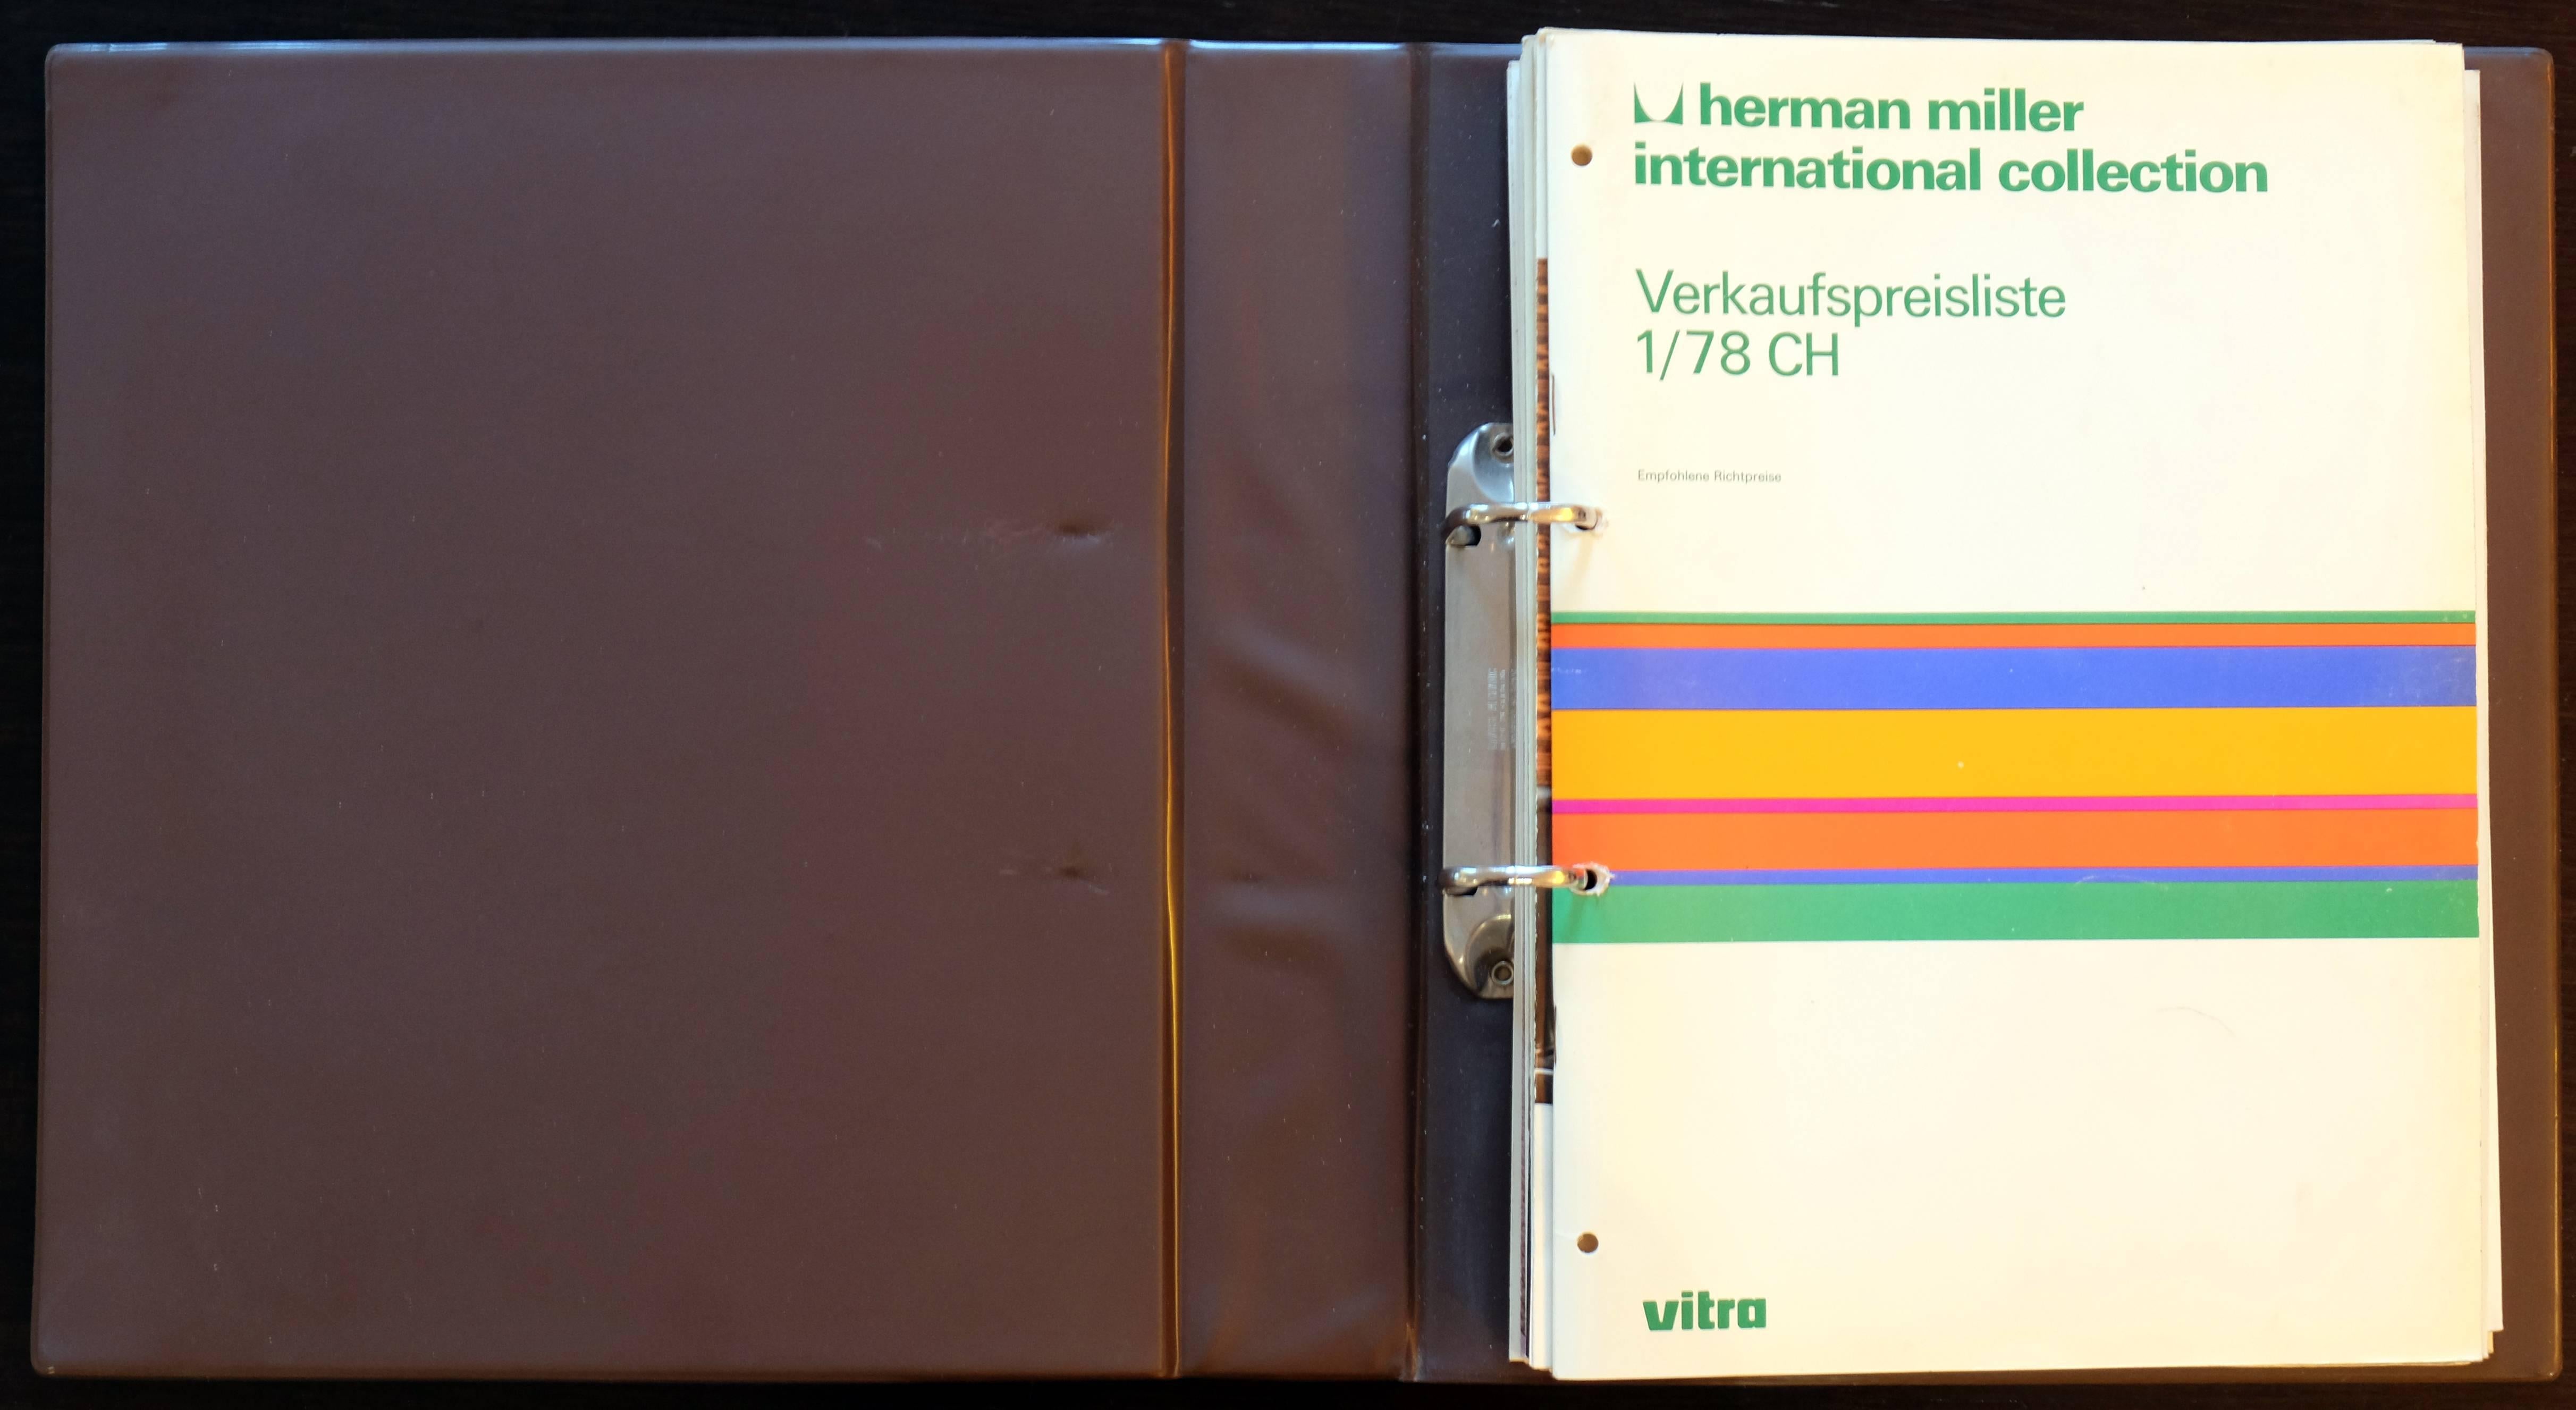 Rare Herman Miller International Collection and Vitra 1978 Dealer's catalogue
With 1978 price list in Swiss franc
Including the monthly magazines with cool pictures of the time
Texts in German, French and English

A must have for collector.